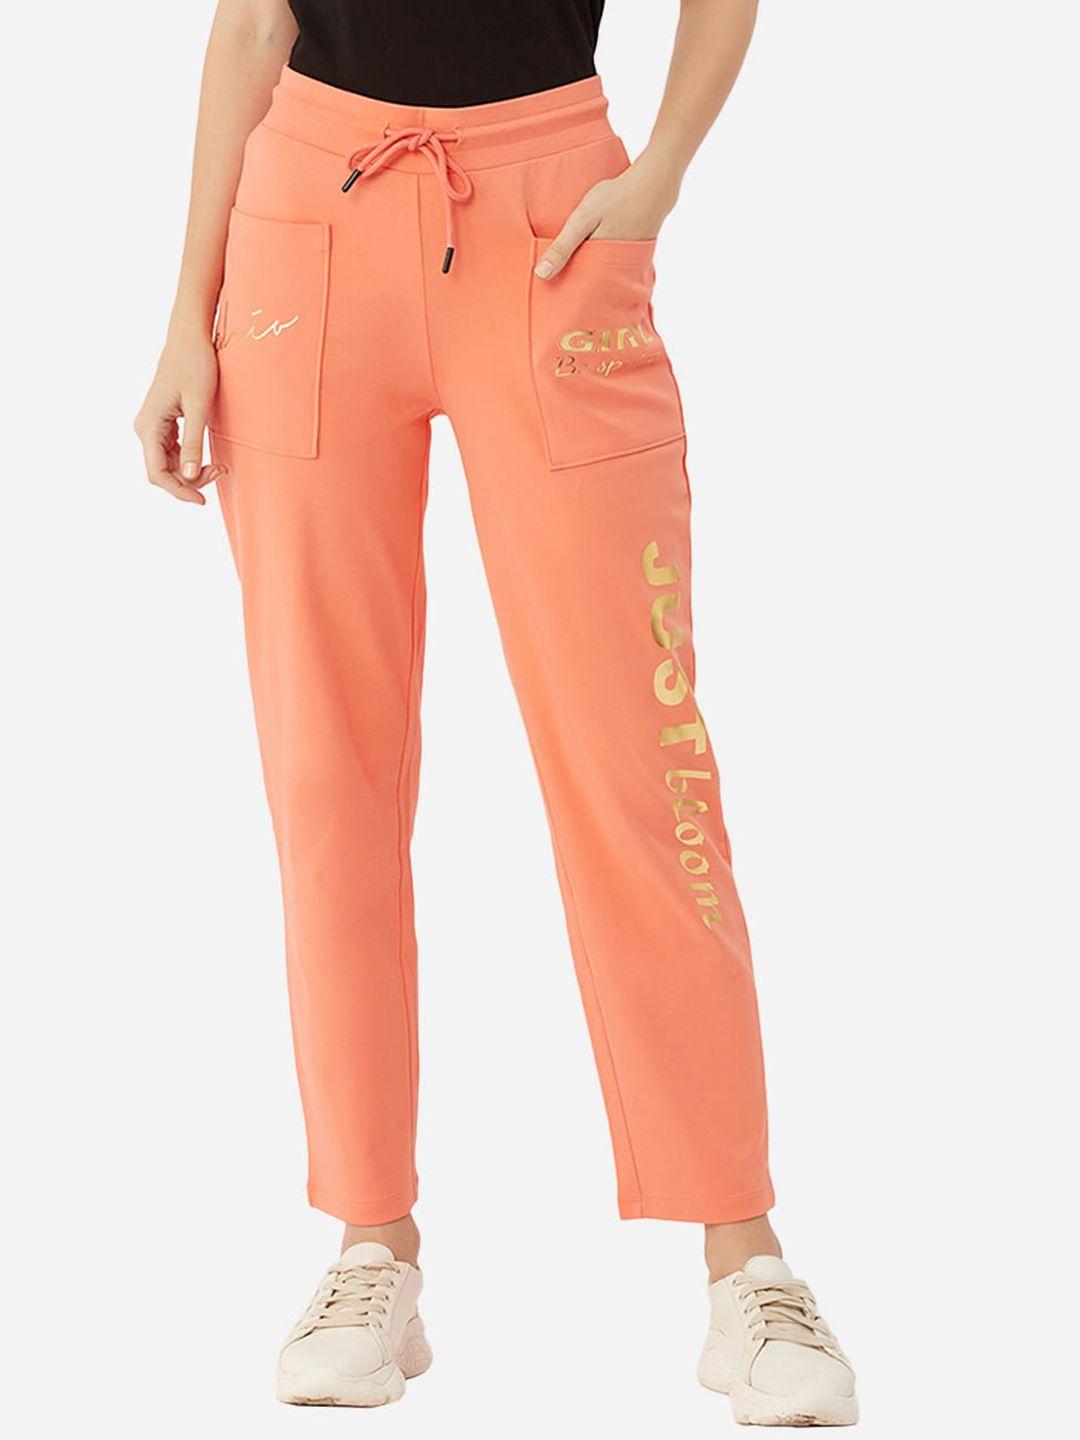 edrio women coral-colored solid cotton track pants